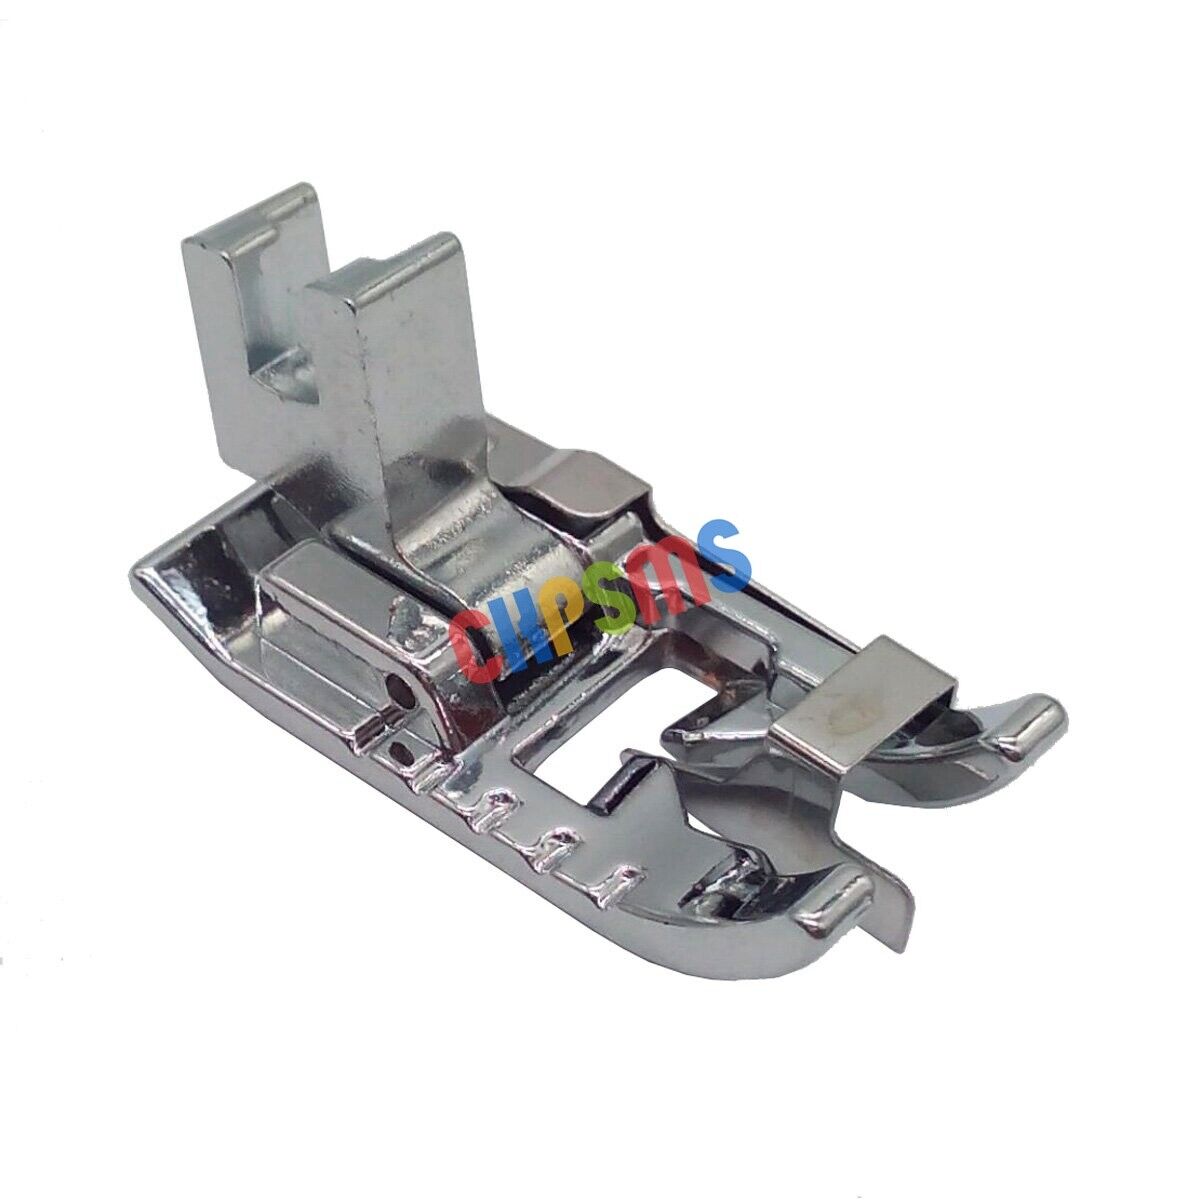 Edge Joining/Stitch in the Ditch Sewing Machine Presser Foot For Brother Home